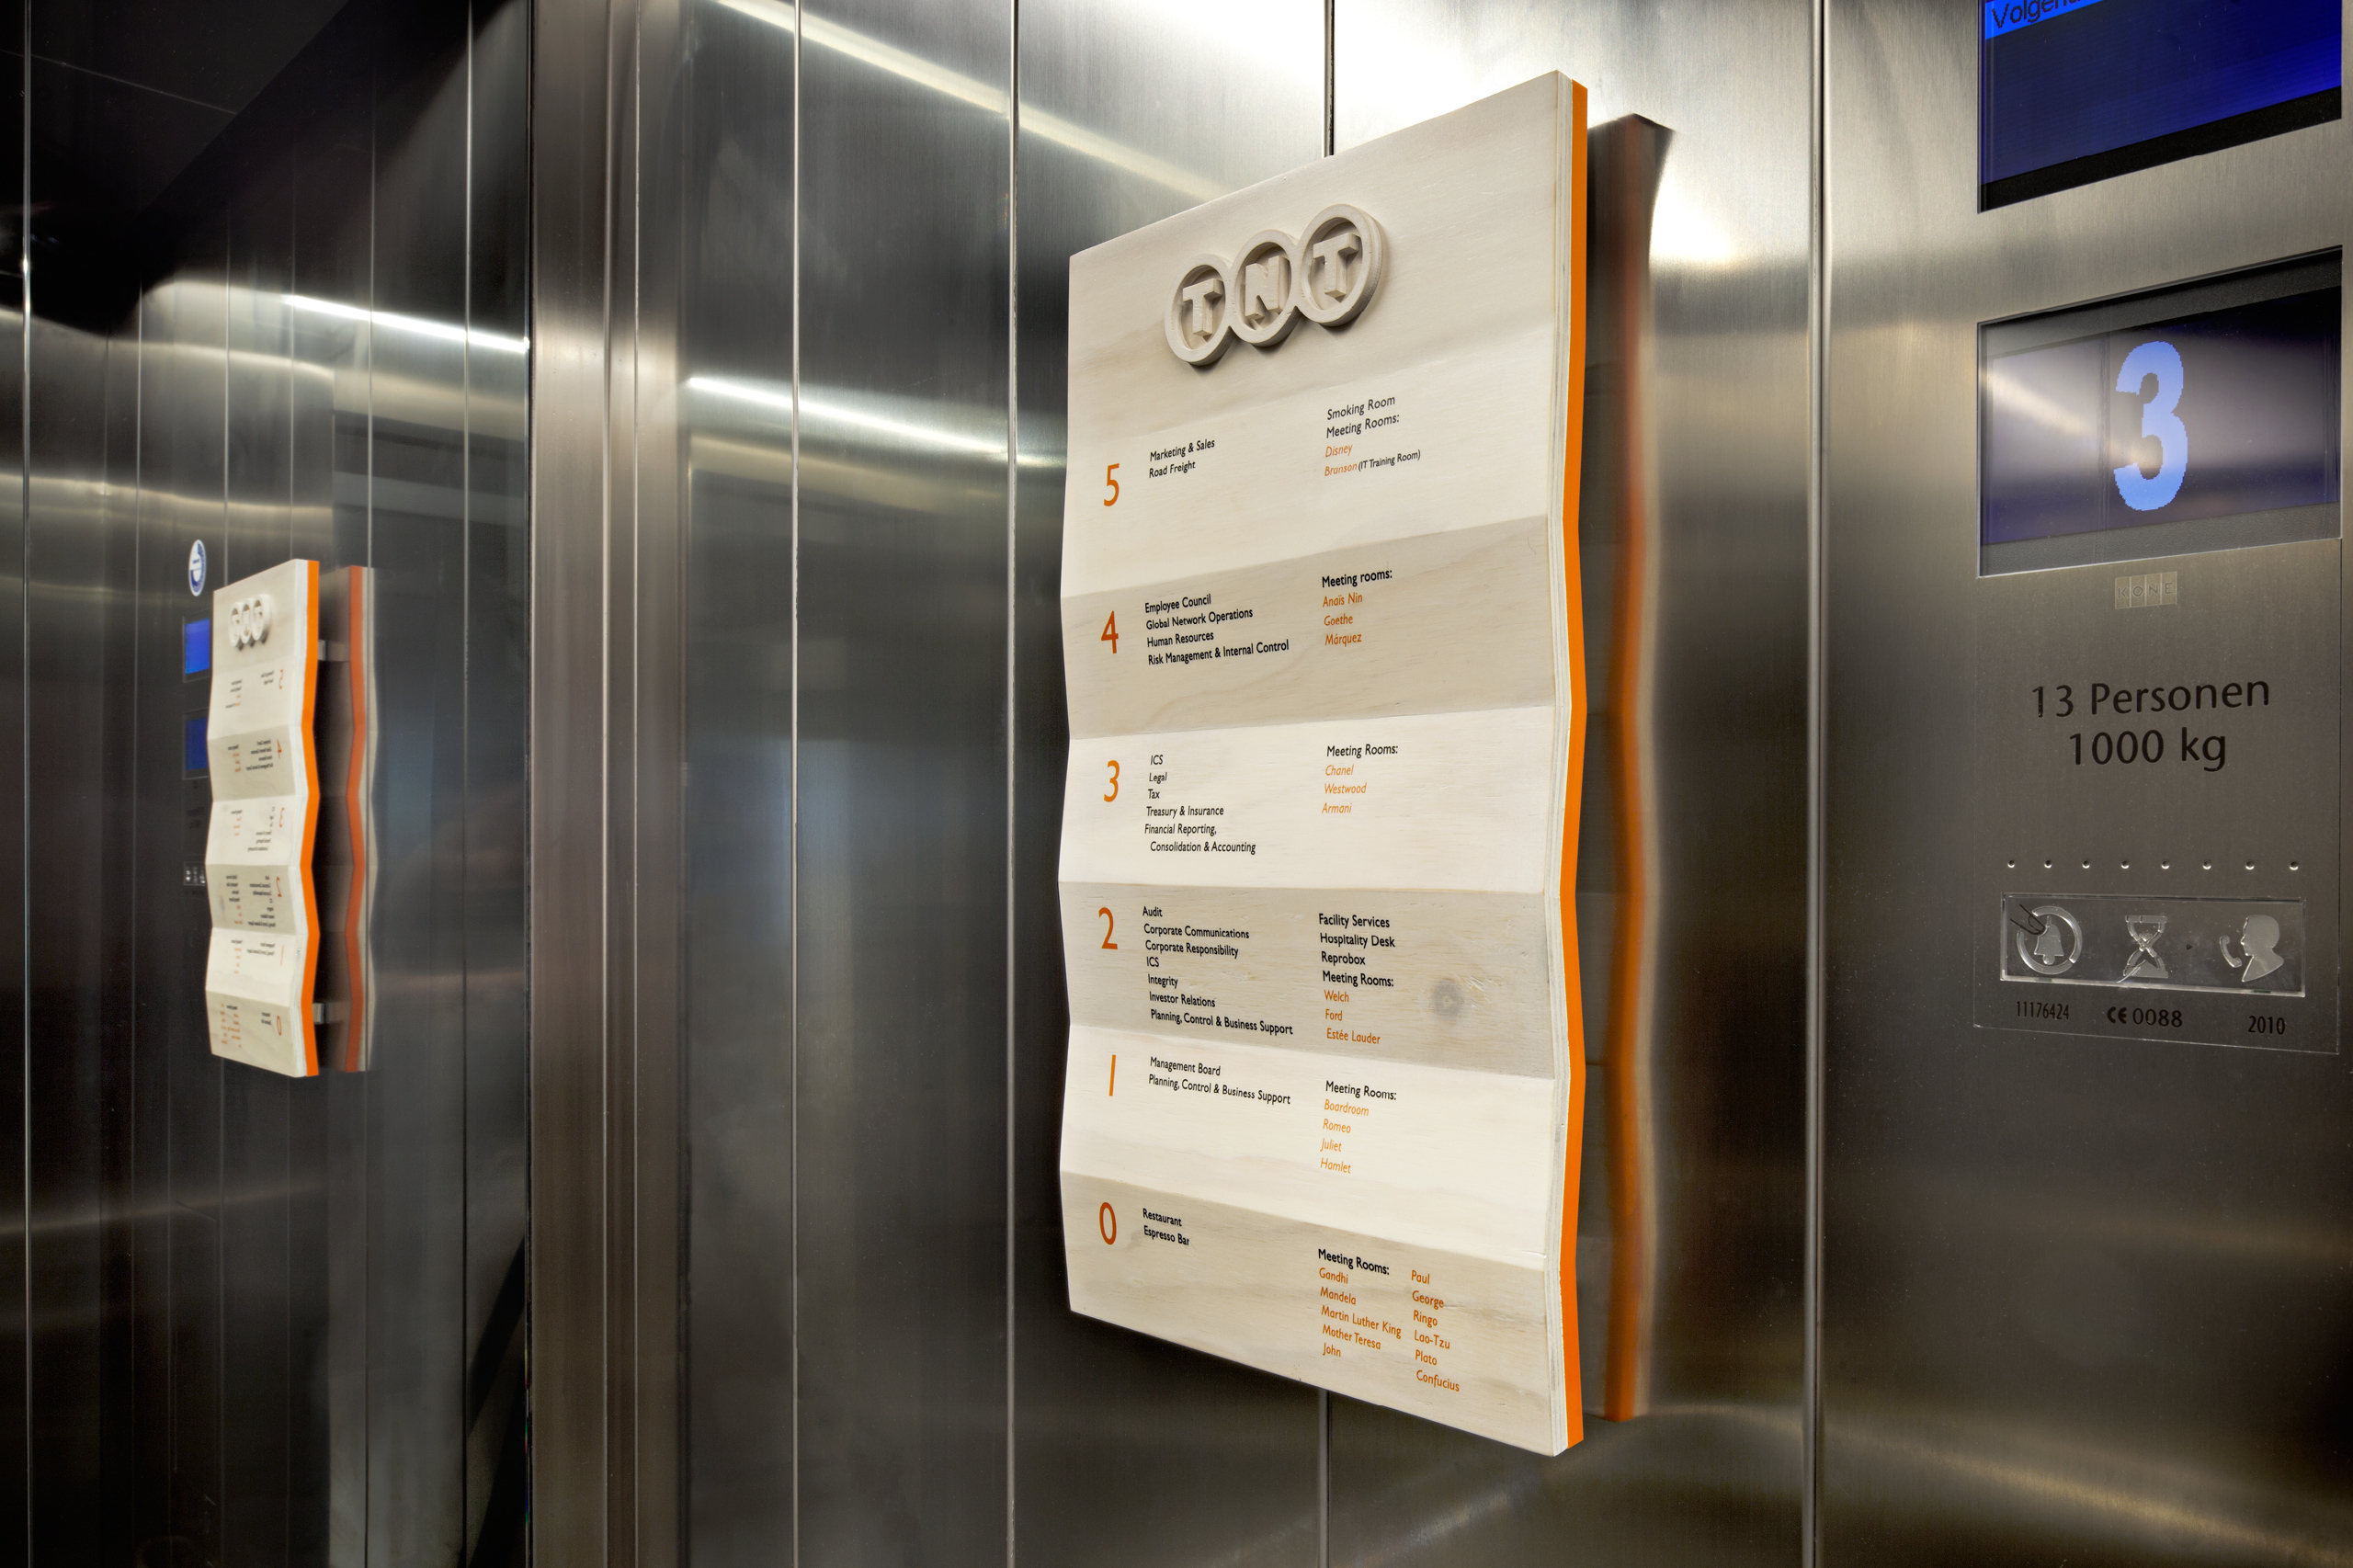 studio dumbar designs sustainable signage for TNT Green Office headquarters signage in lift